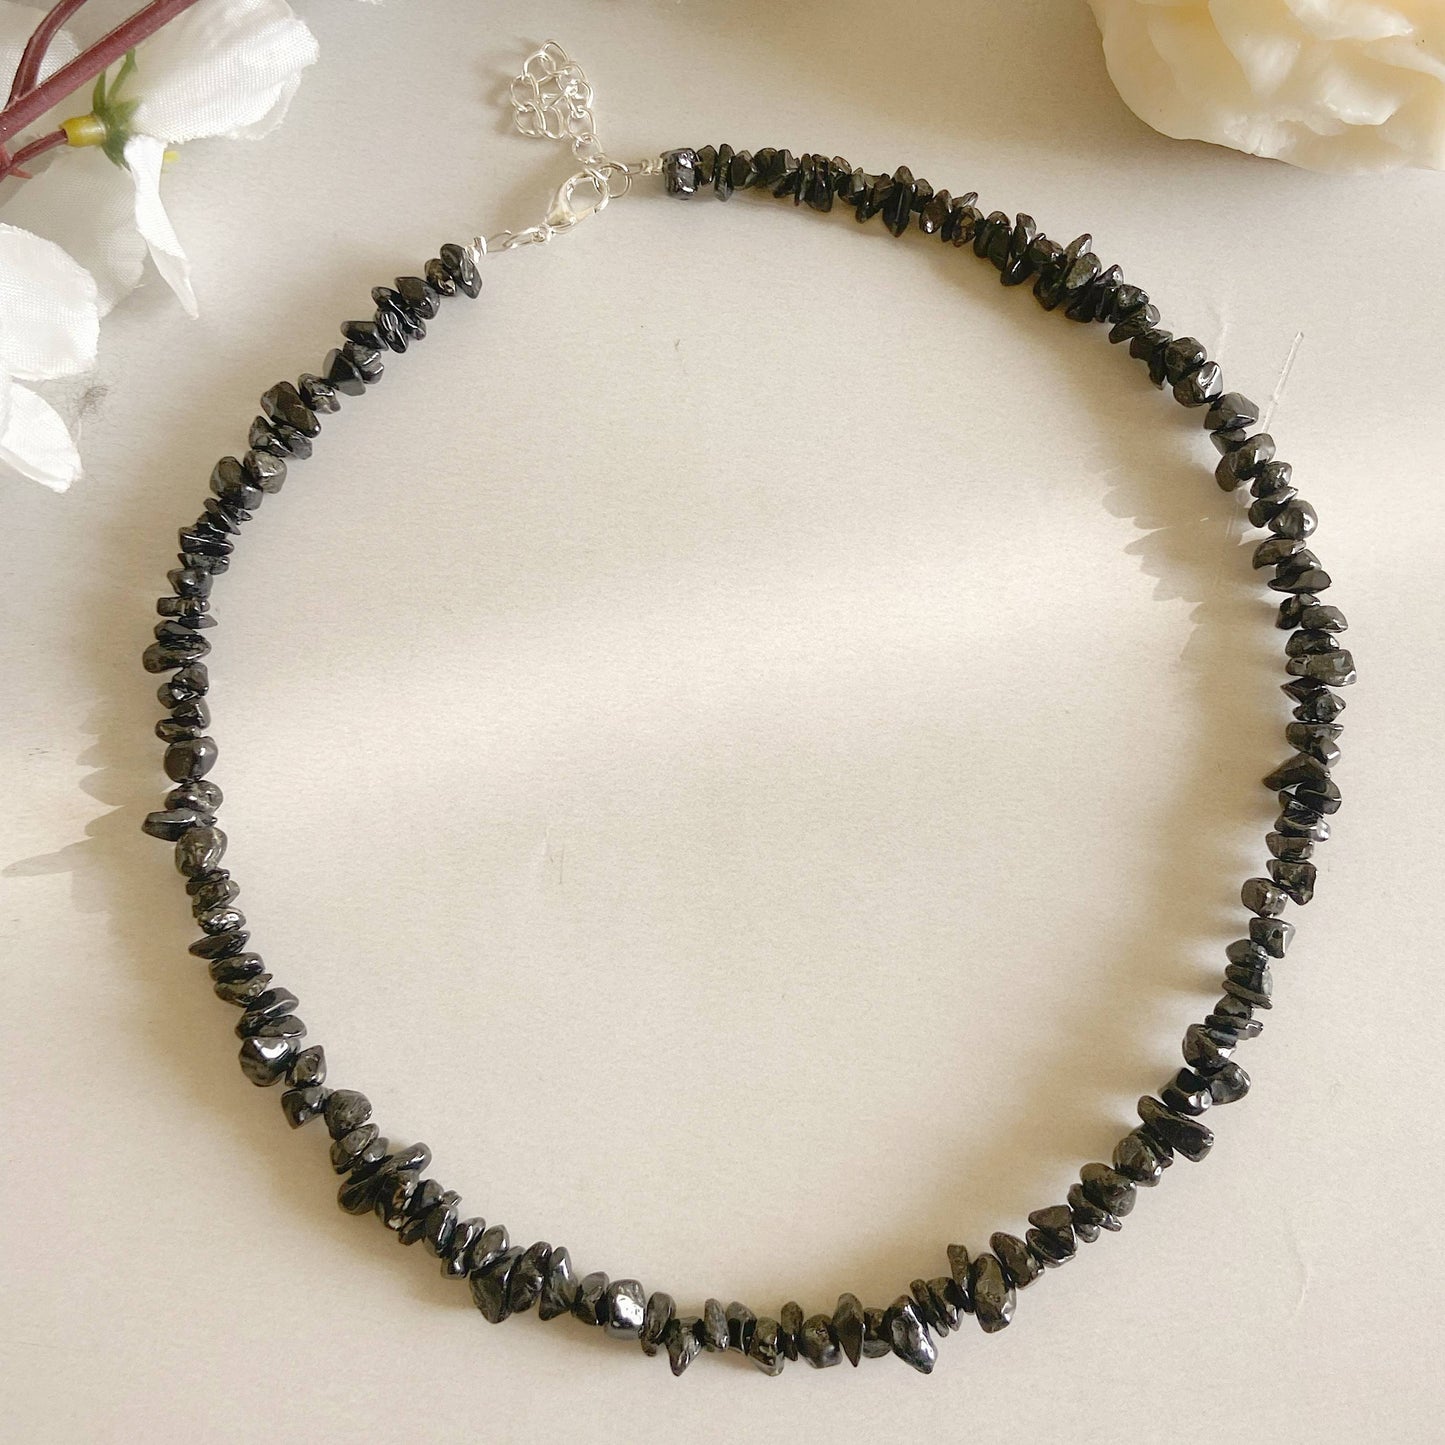 Black Tourmaline Chips Necklace | Stone Of Protection Crystal & Stones